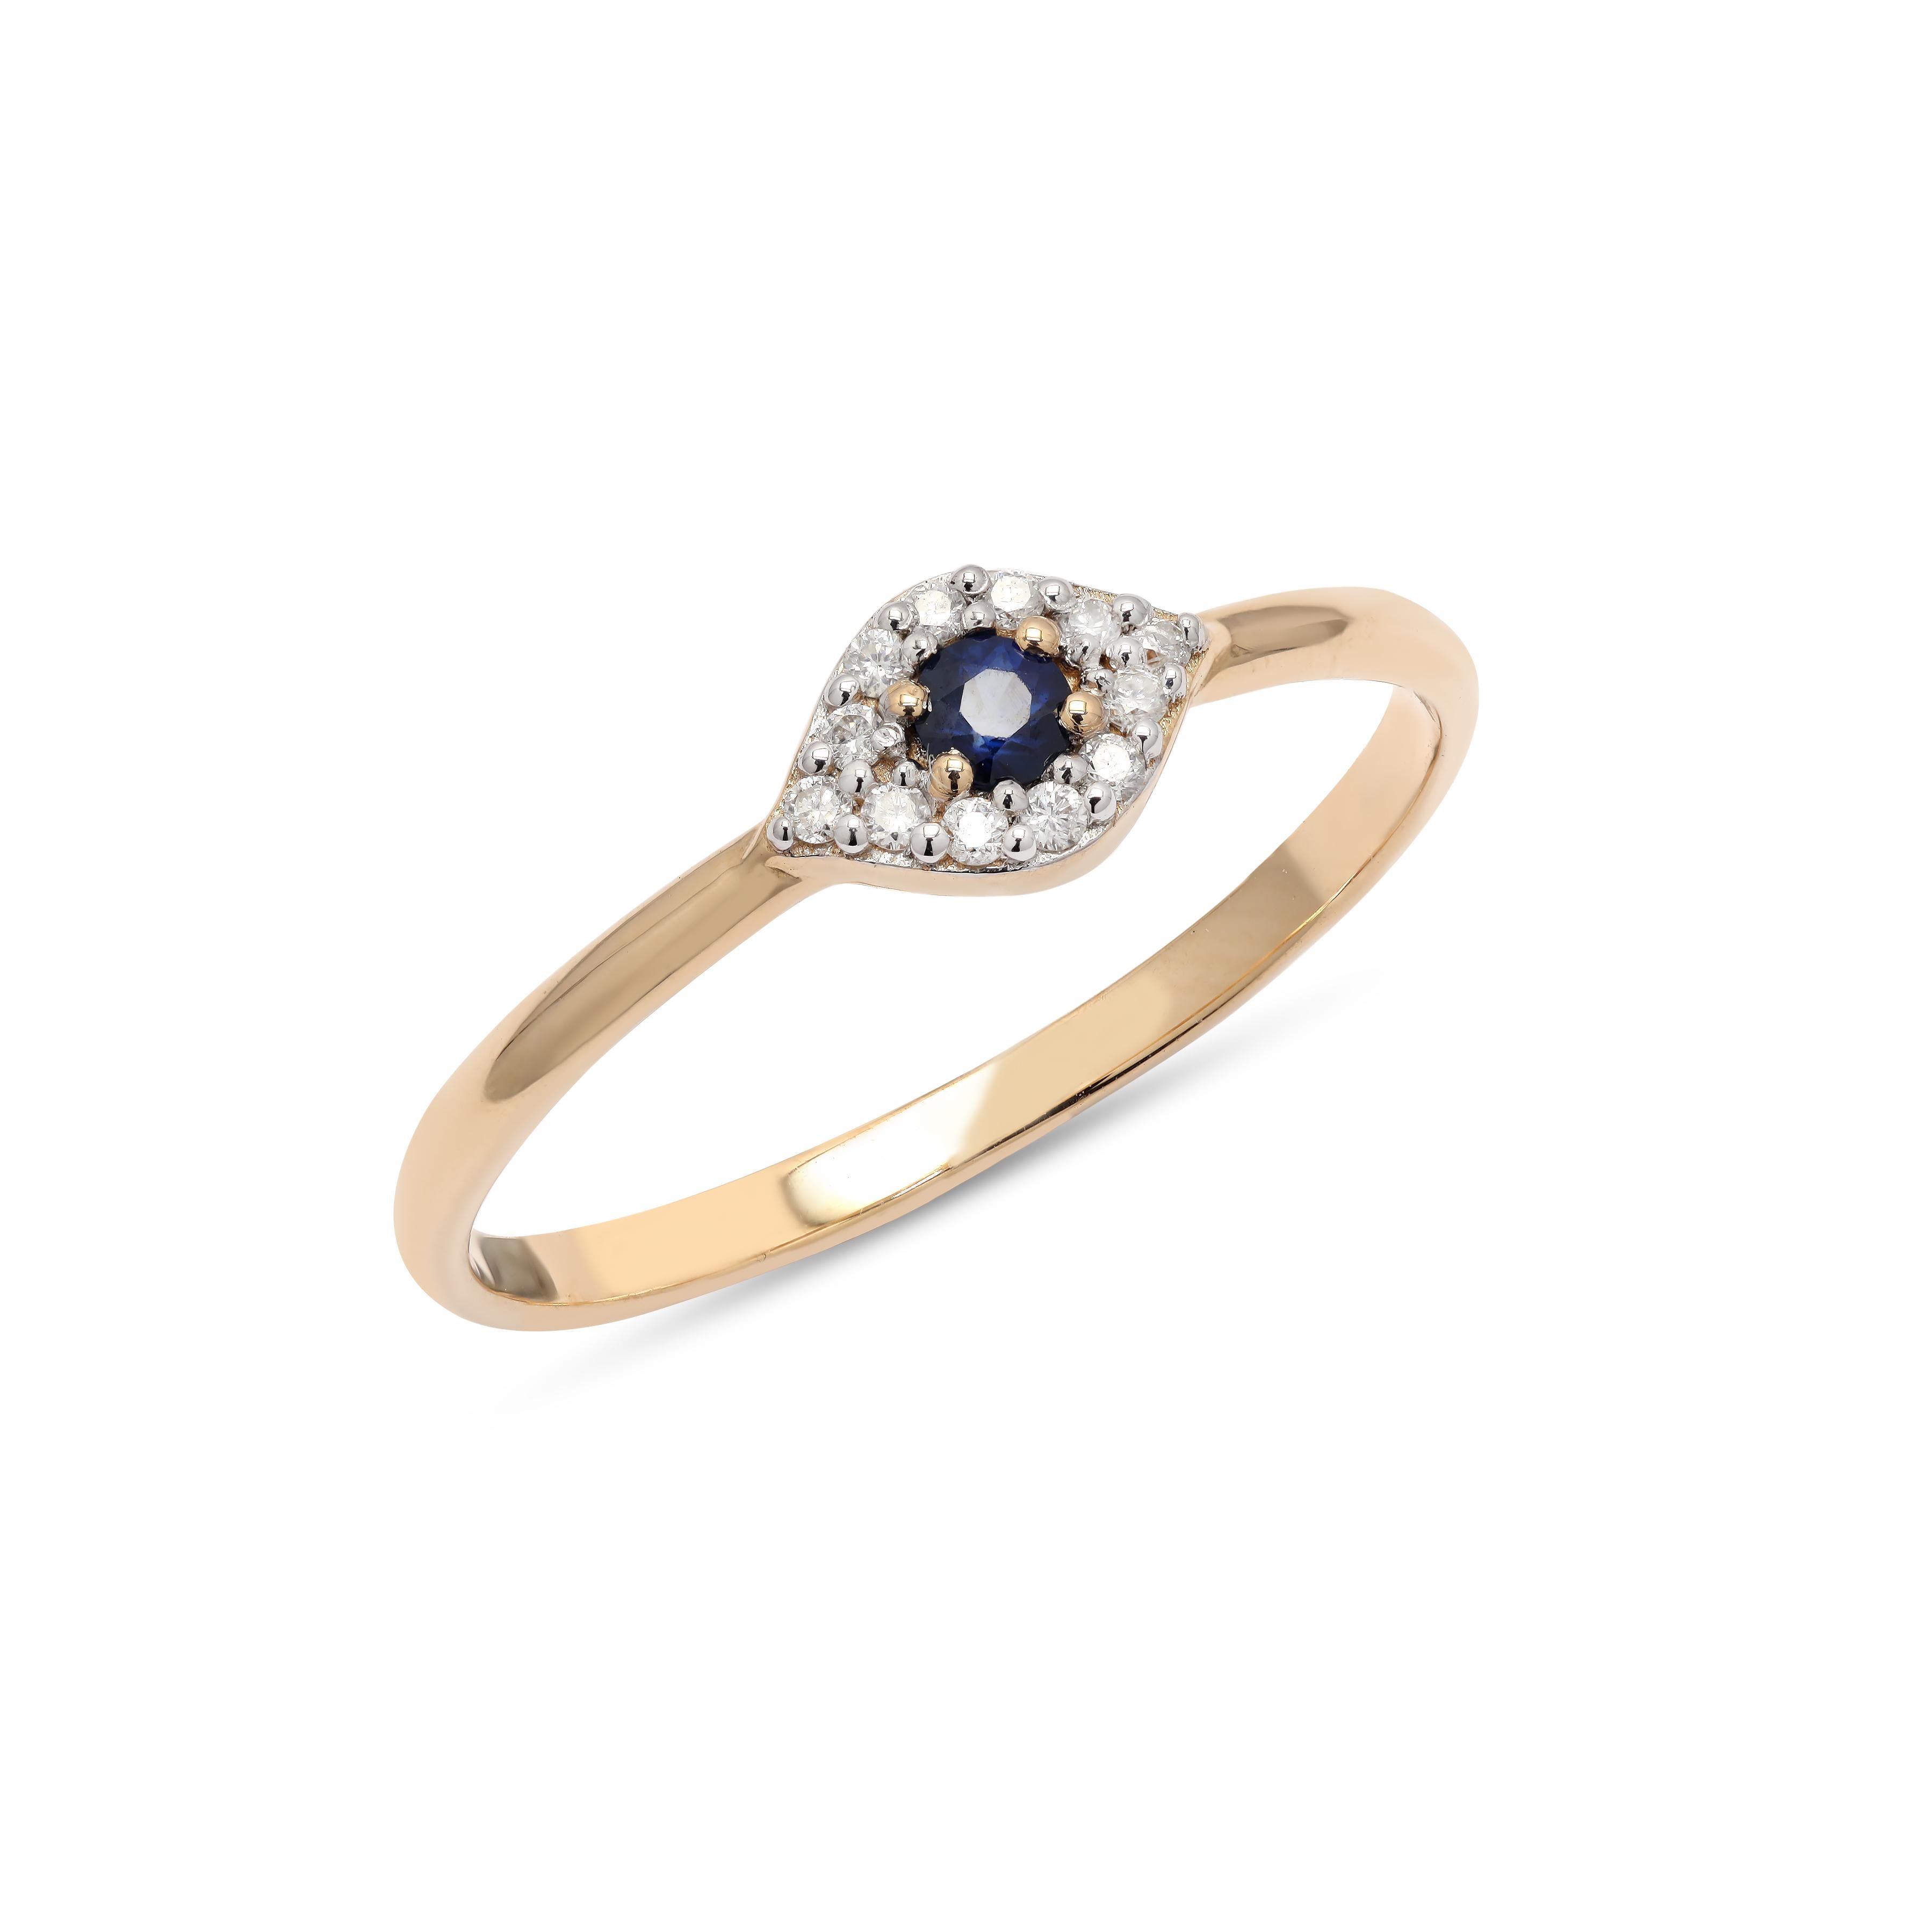 For Sale:  Blue Sapphire Evil Eye Diamond Ring in 14K Yellow Gold 5